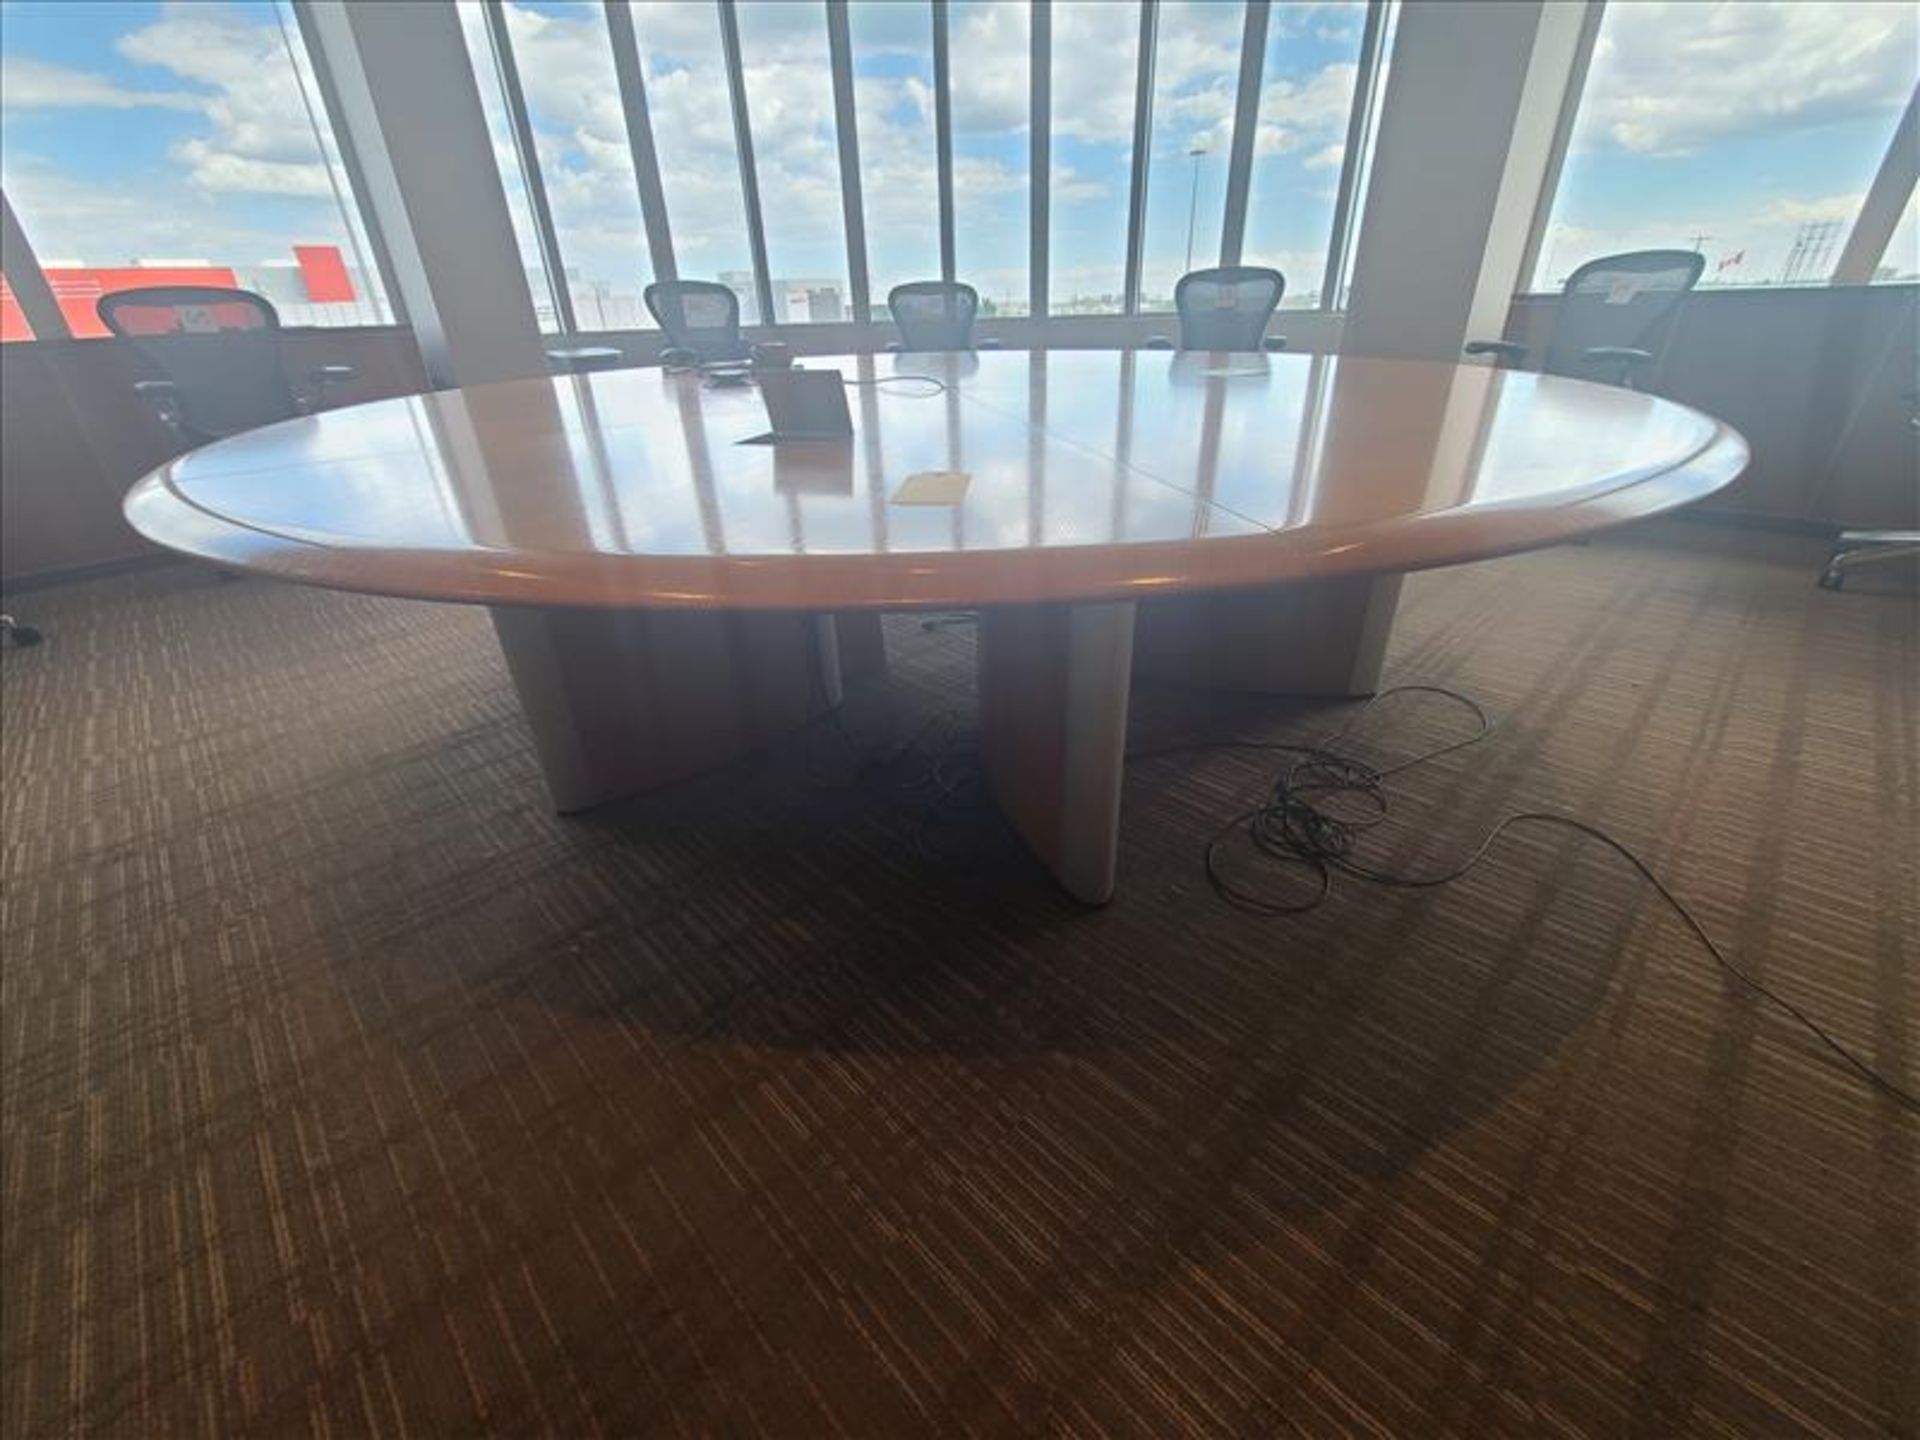 Boardroom Meeting Table approx. 118 in. dia (Qty 1) (Floor 3) (Boardroom 301) - Image 2 of 2